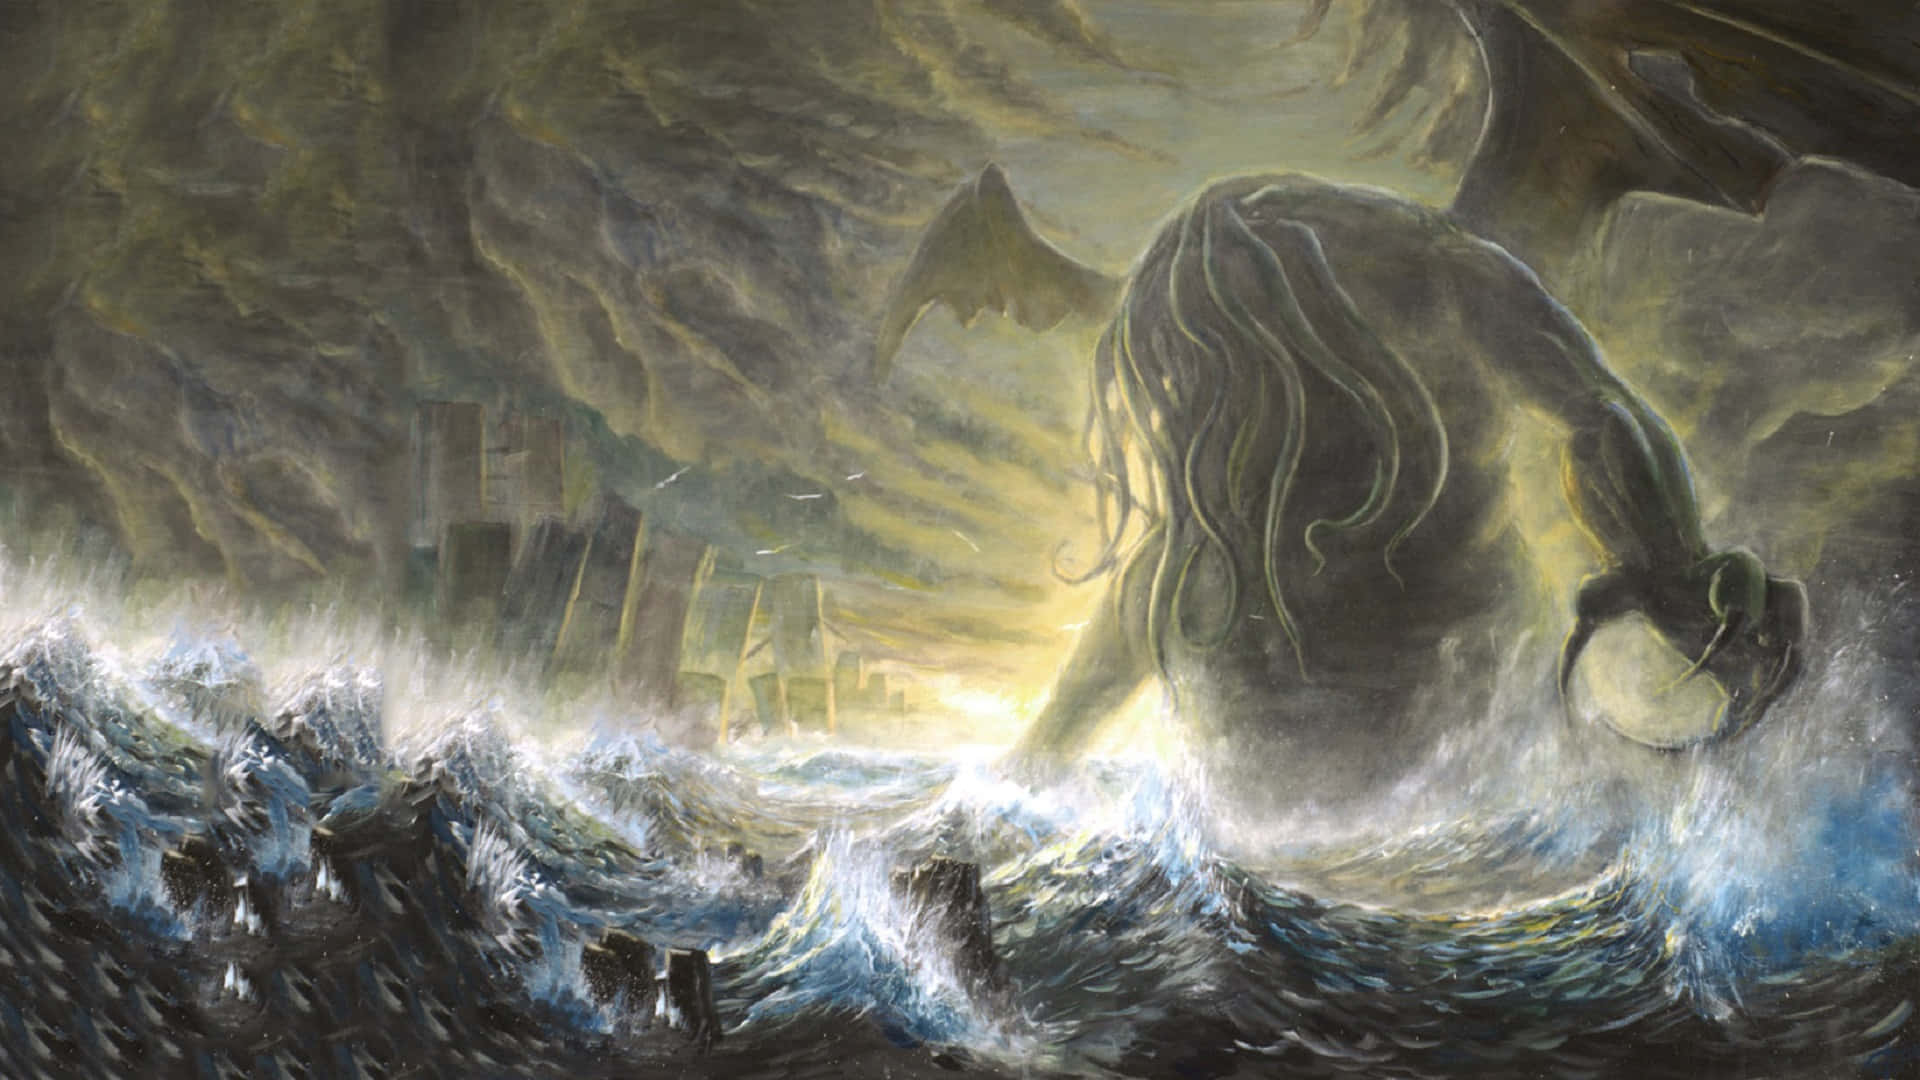 The Legendary Cthulhu Rises From the Depths